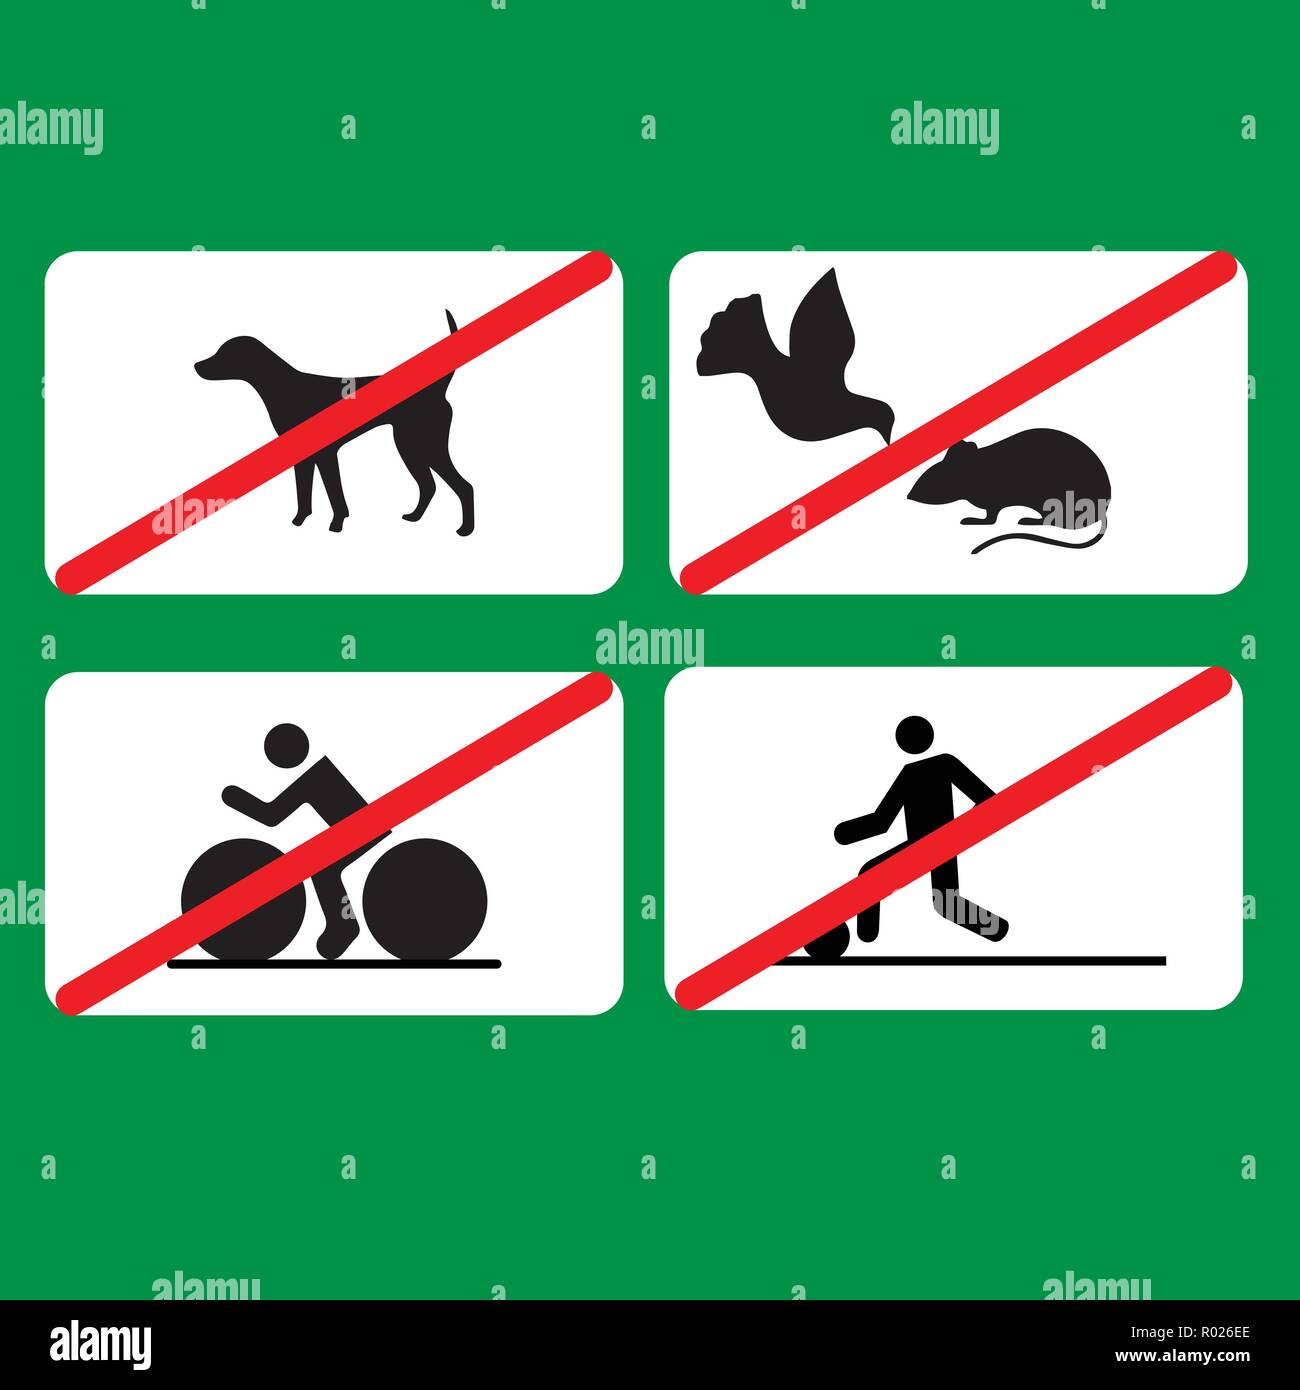 Several prohibitions signs in the park: no cycling, no dogs, no football, dont feed pigeons Stock Vector